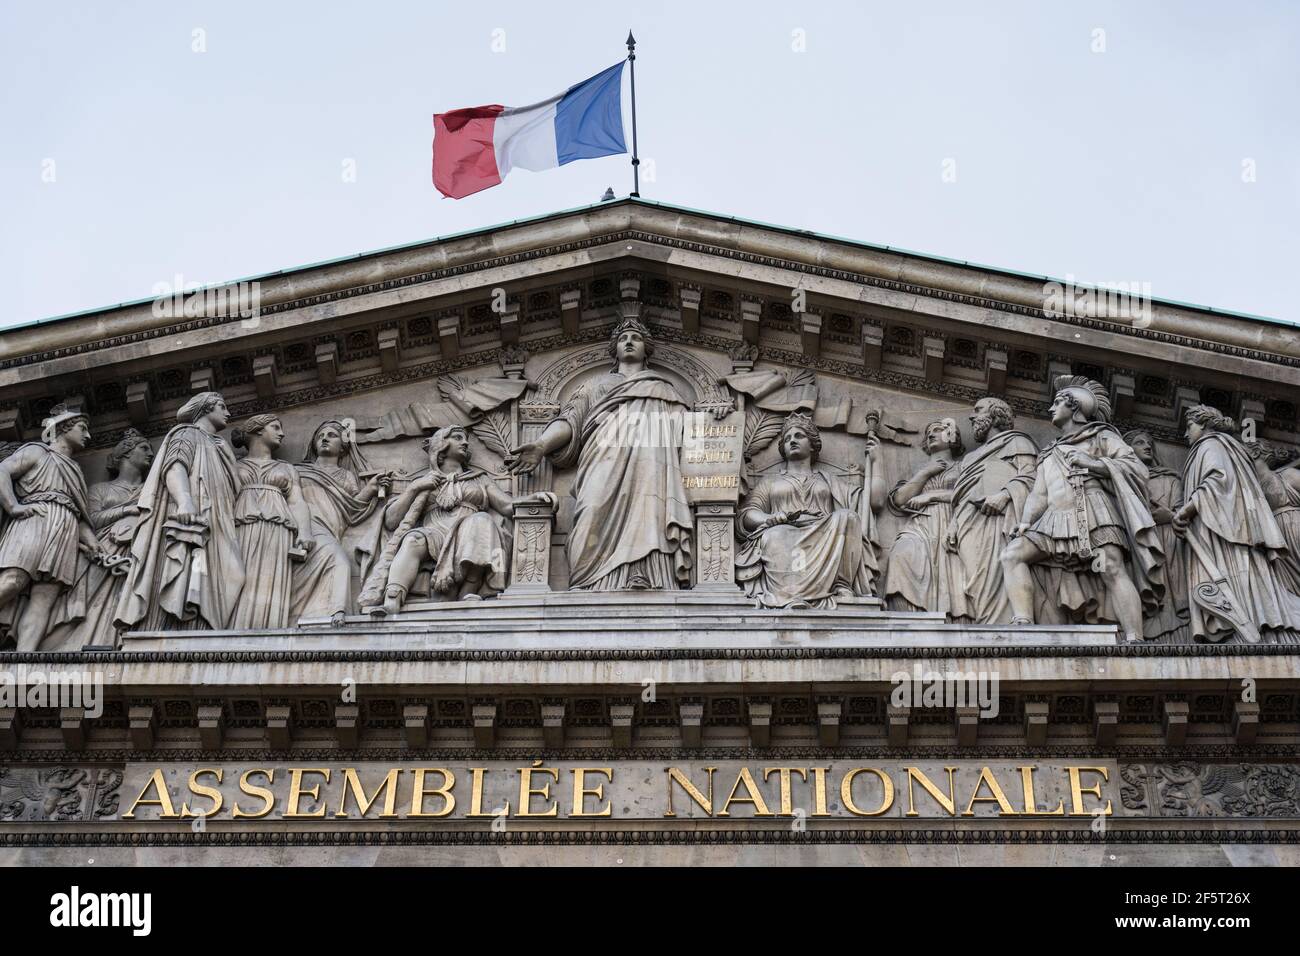 PARIS, FRANCE - The french national assembly (l'Assemblée nationale). Also called Palais Bourbon. French parliament. Stock Photo